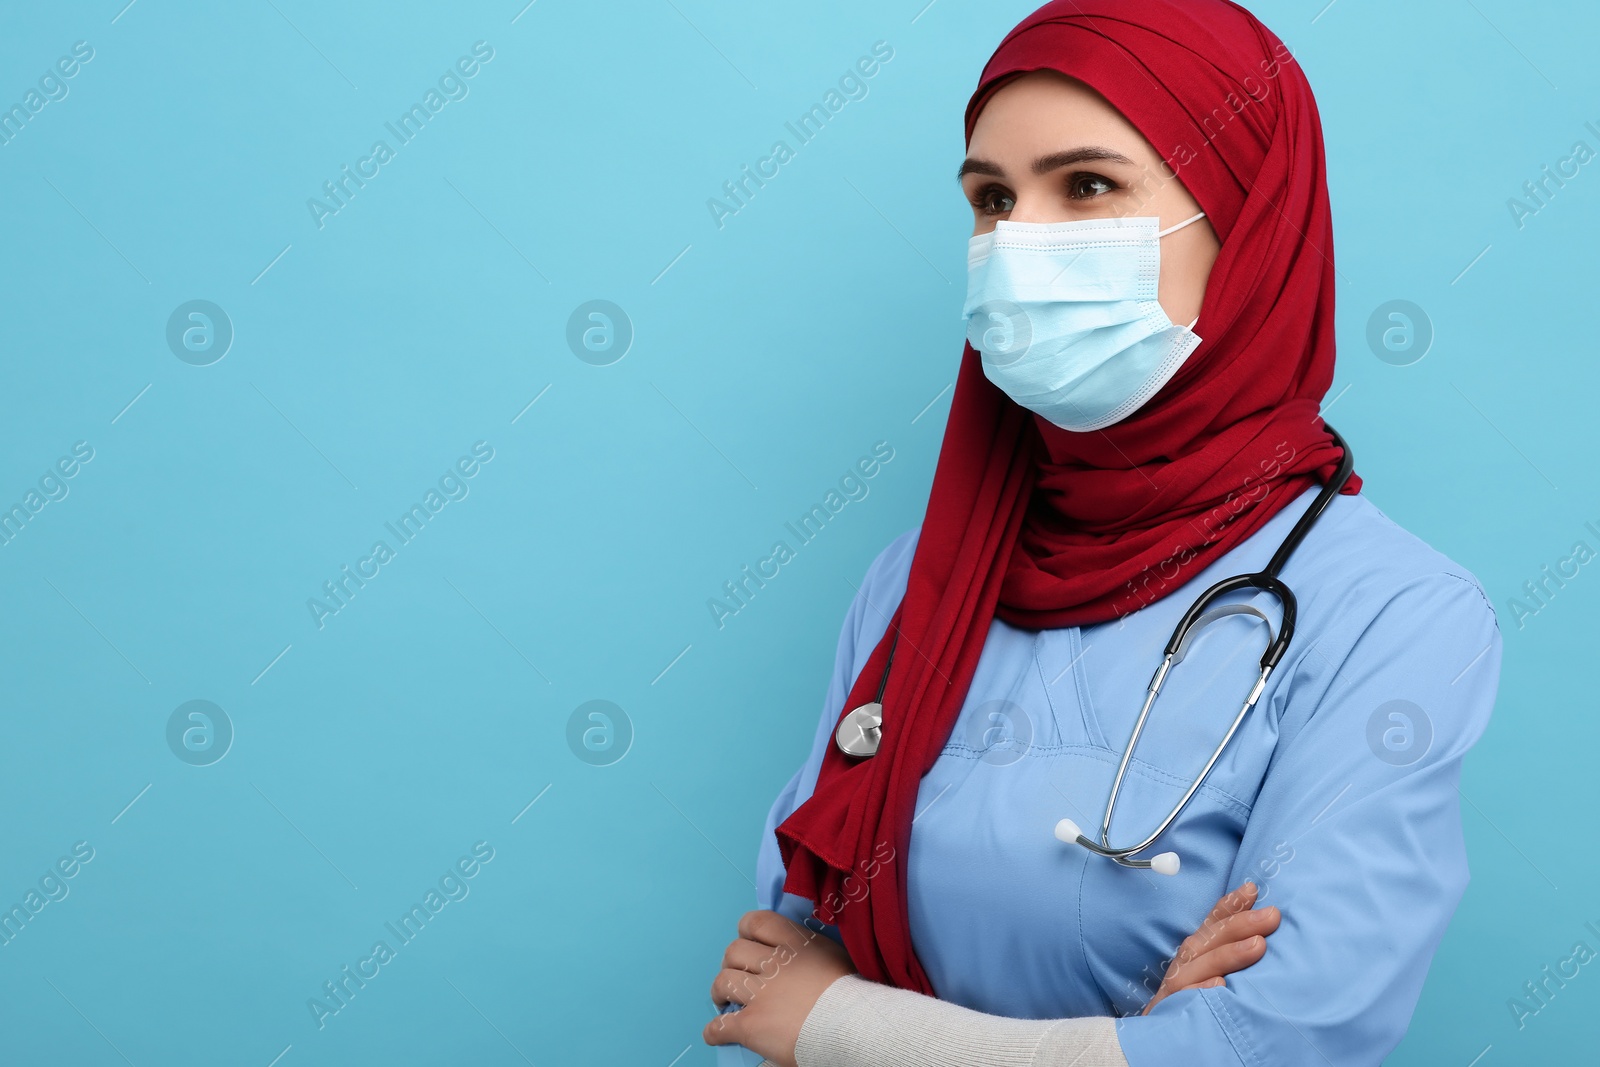 Photo of Muslim woman wearing hijab, medical uniform and protective mask on light blue background, space for text